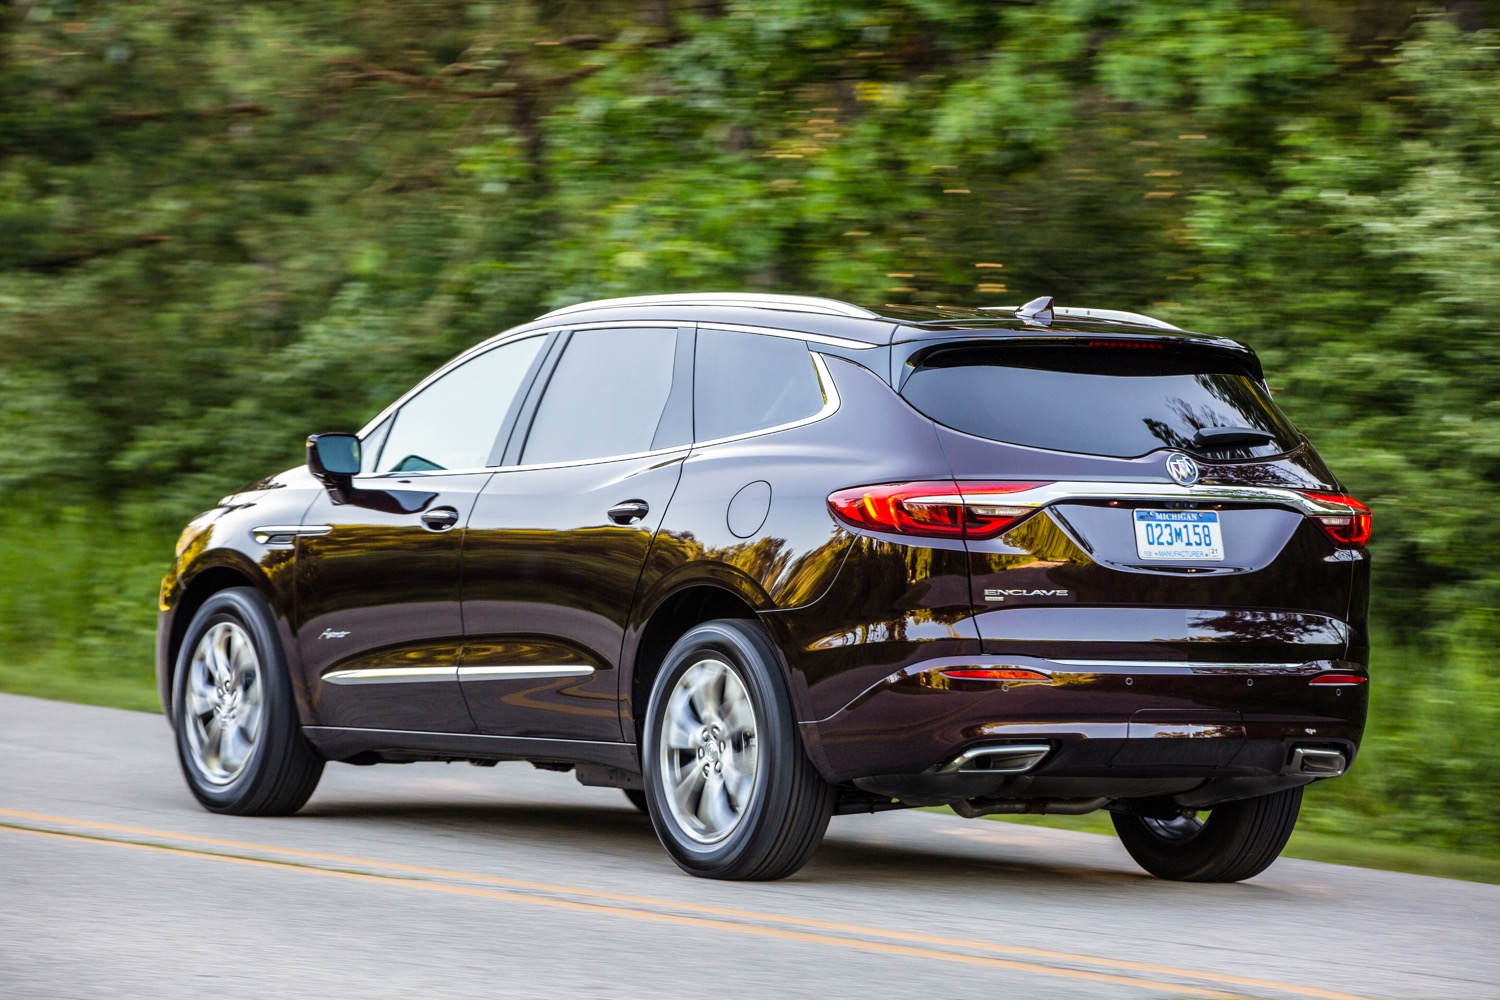 2021 Buick Enclave Availability Info, Specs, Wiki | GM Authority